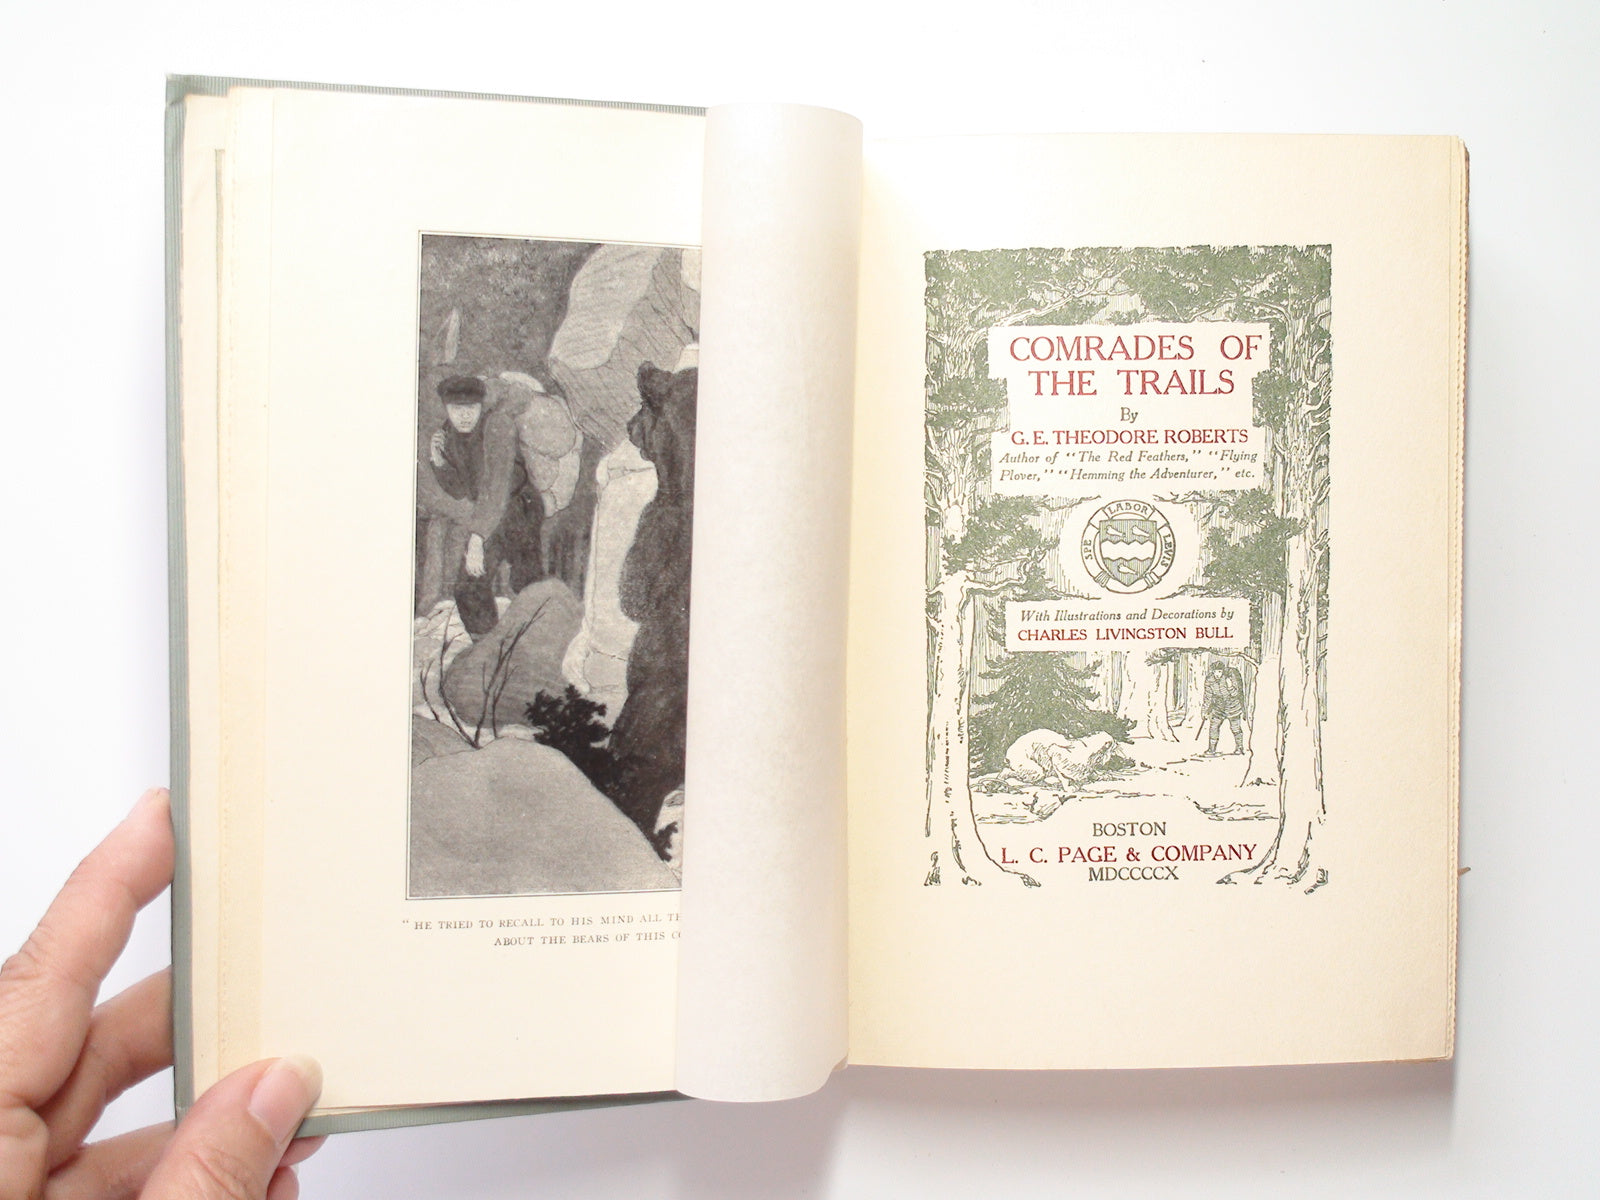 Comrades of the Trails, by G. E. Theodore Roberts, Illustrated, 1st Ed, 1910